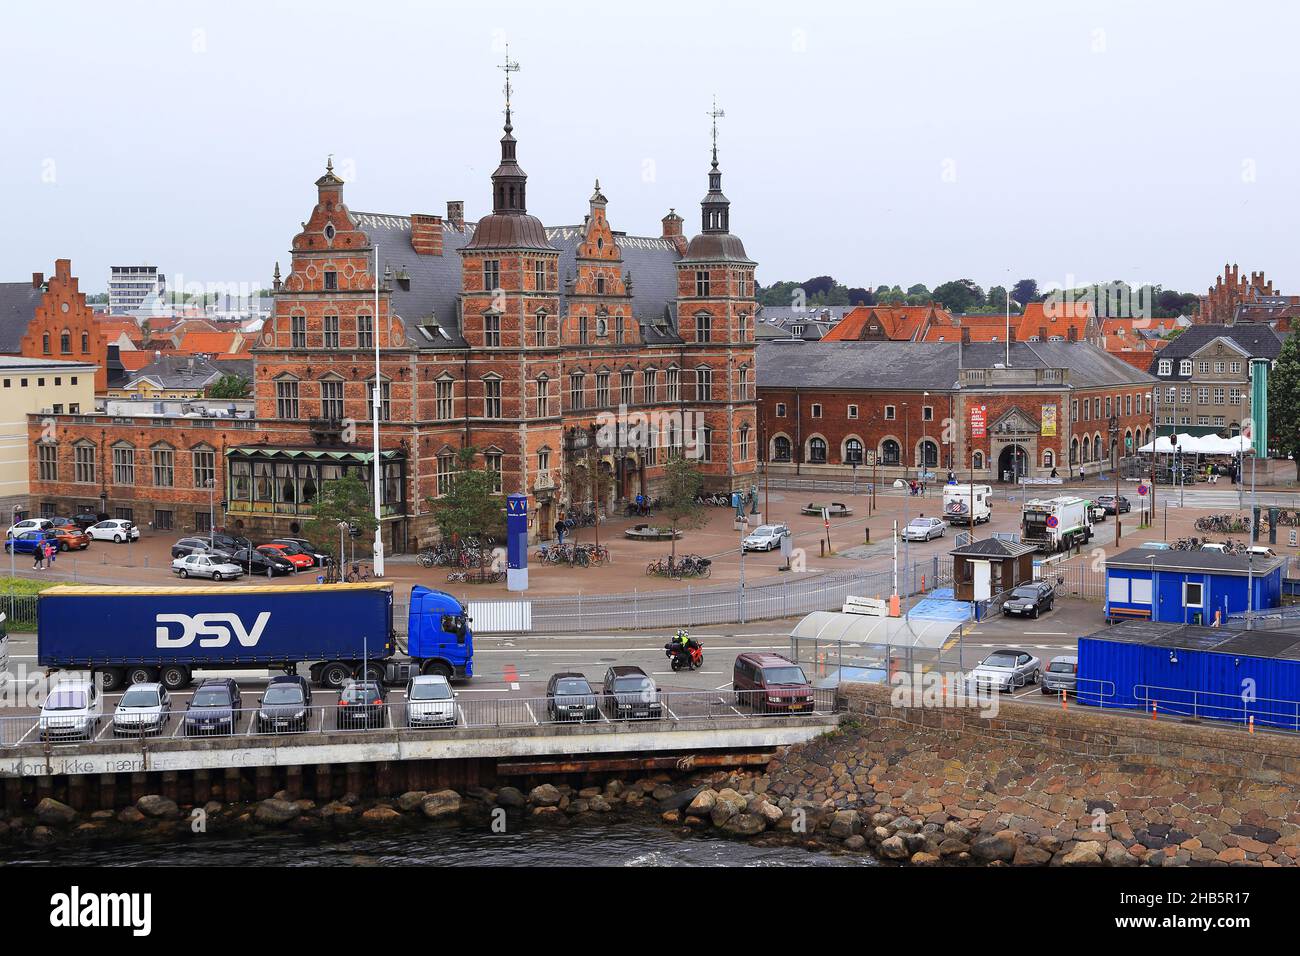 HELSINGOR, DENMARK - JUNE 30, 2016: This is the railway station of the city, which is more similar in architecture to a medieval castle. Stock Photo